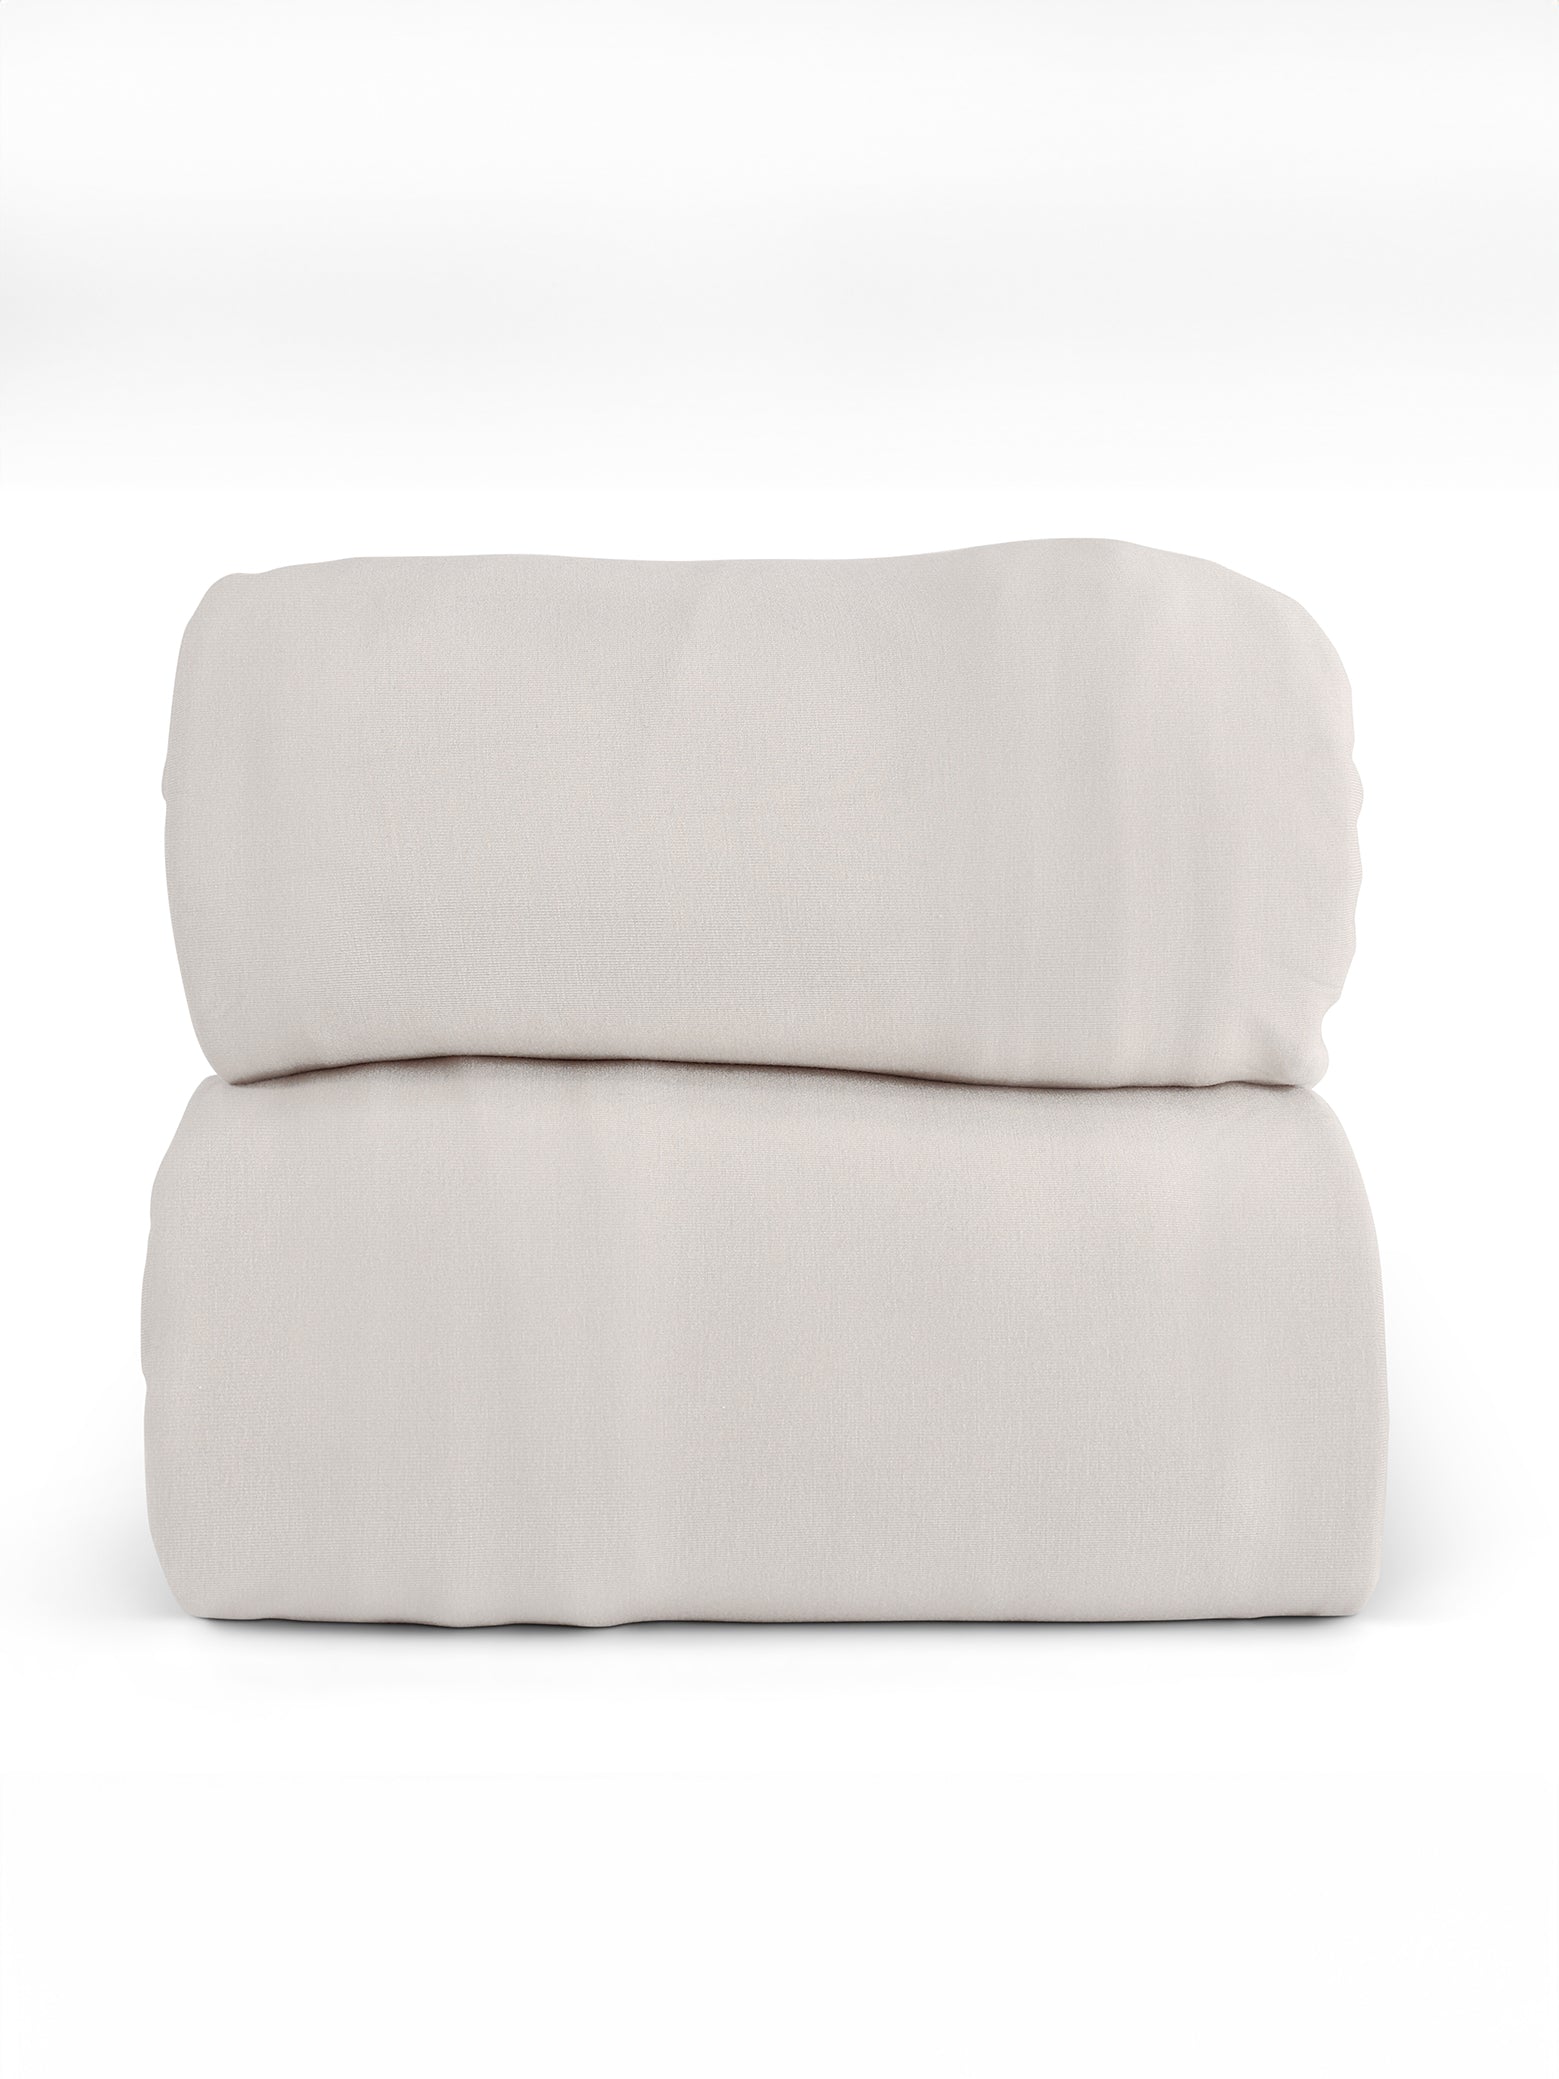 A neatly folded Bamboo Jersey Sheet Set by Cozy Earth in a light beige color is stacked in two layers against a white background. The sheets have a smooth texture and appear soft and plush.